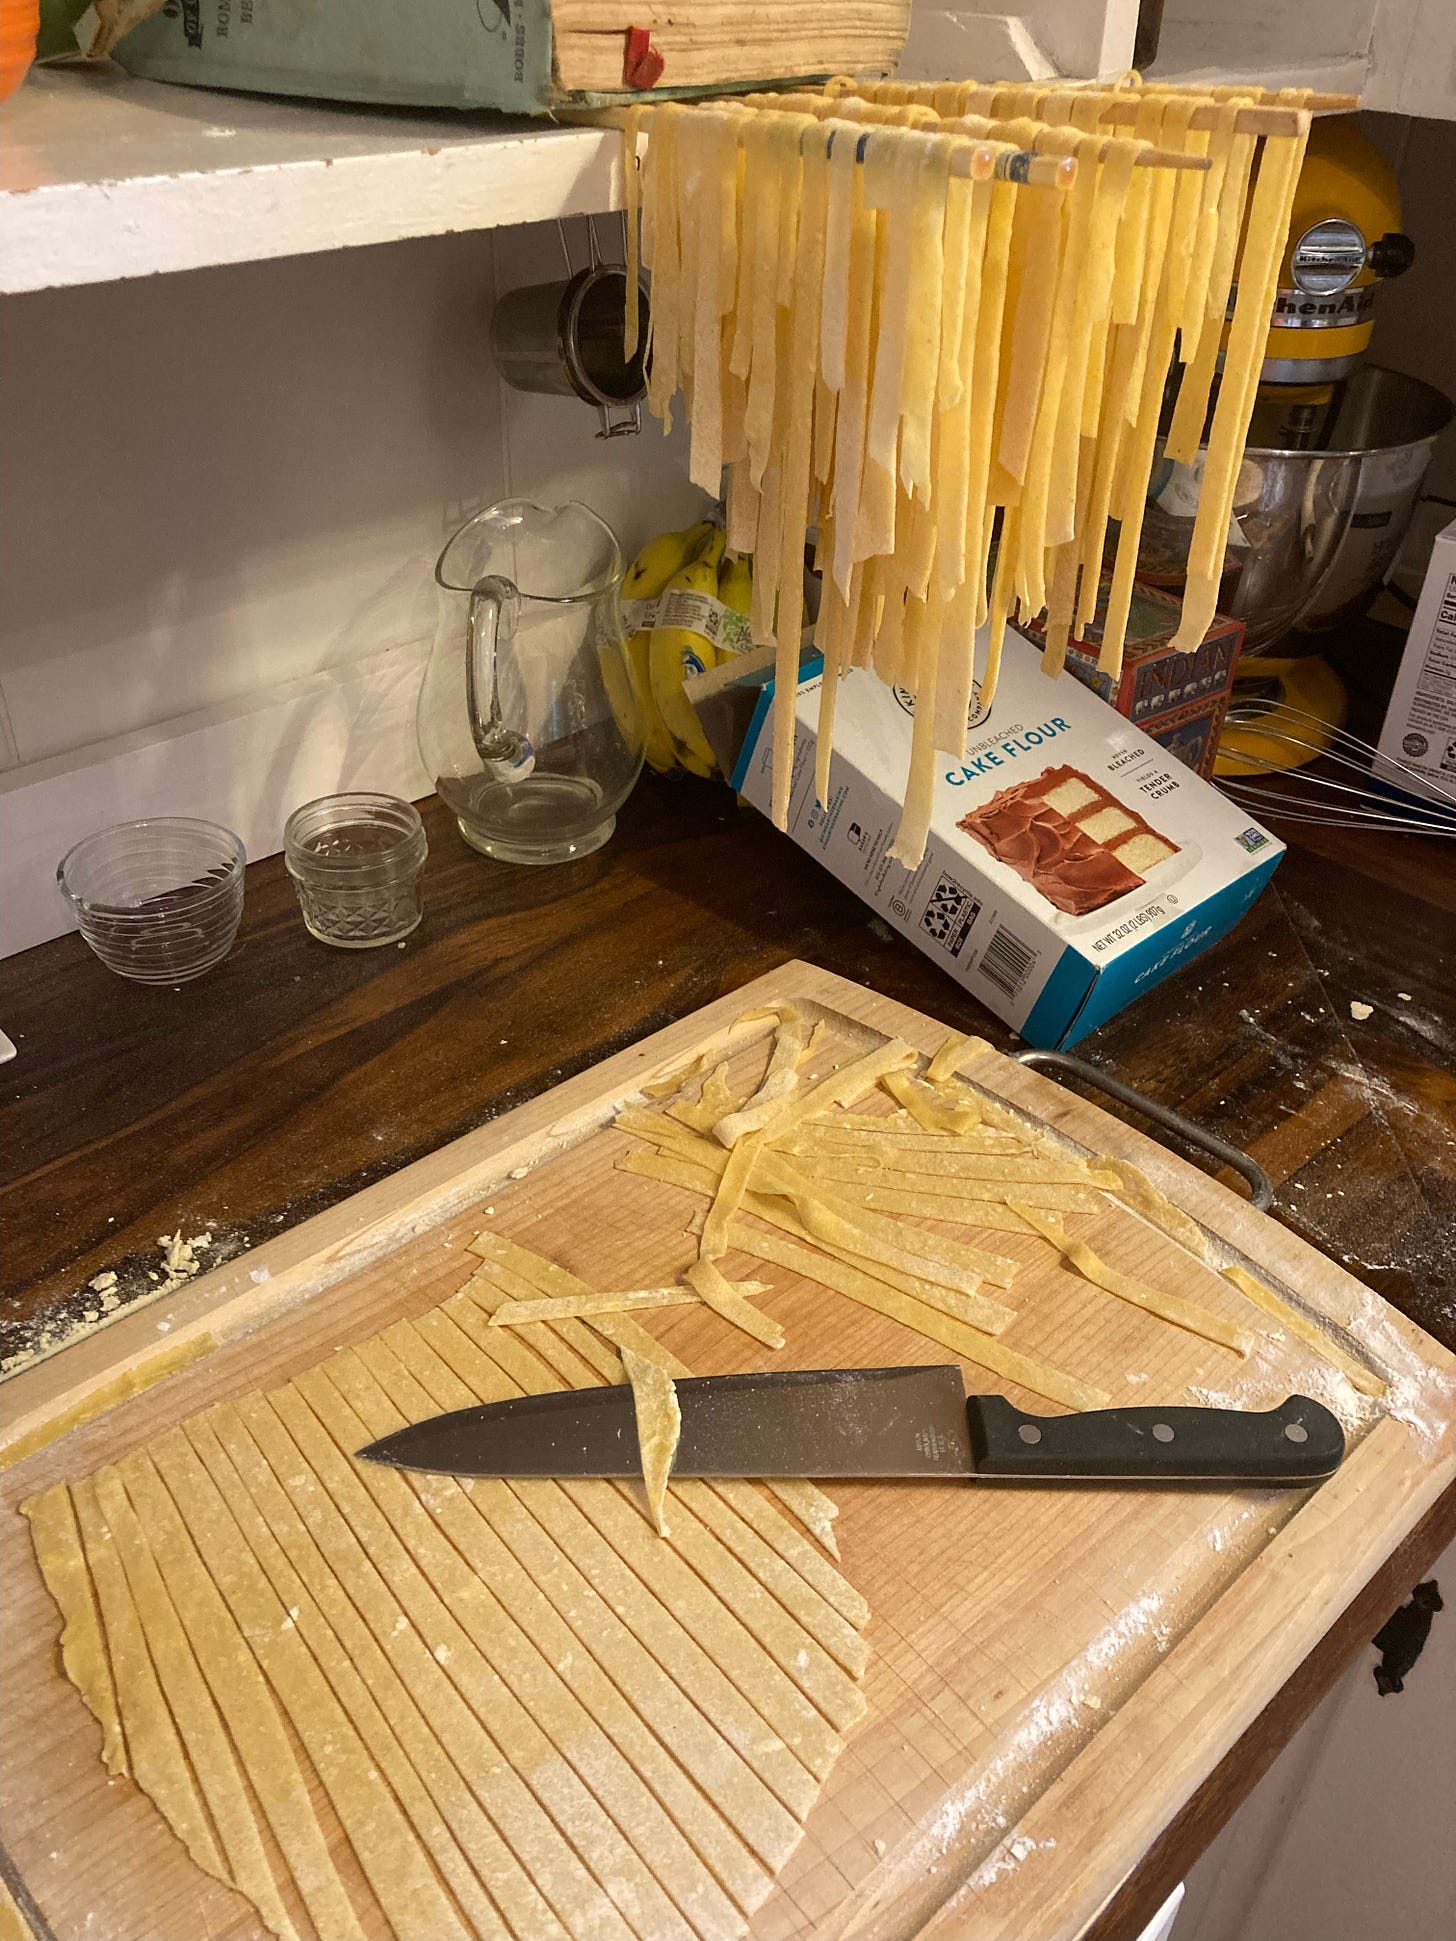 Freshly made pasta hangs from chopsticks while more is being cut on a wooden board on a counter, also visible is a box of Cake Flour from King Arthur Company.